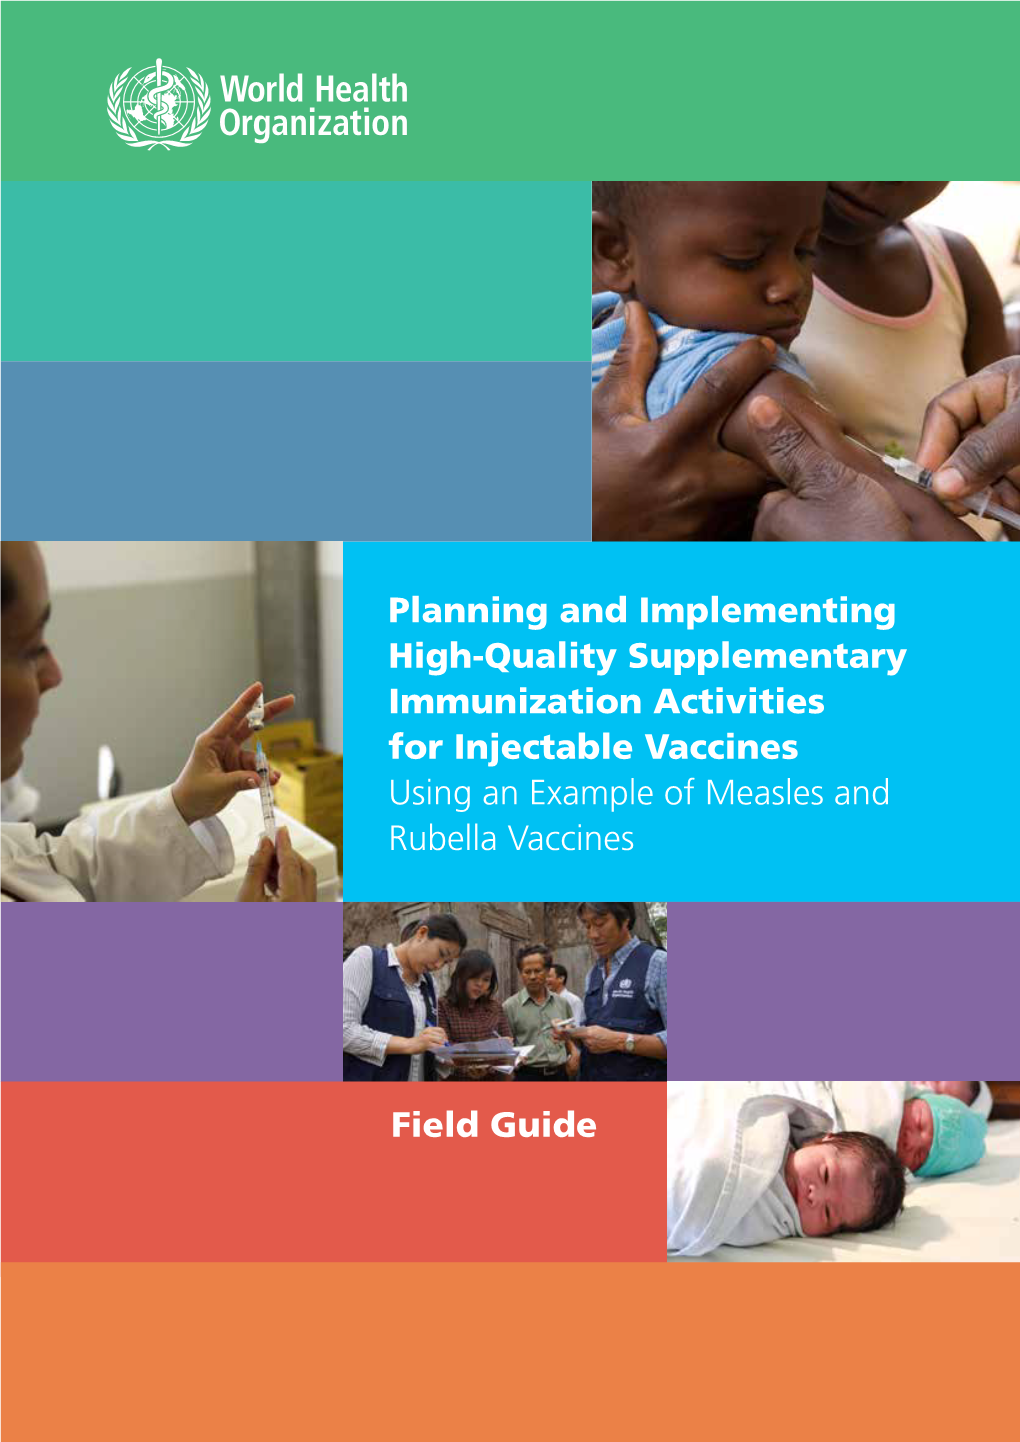 Planning and Implementing High-Quality Supplementary Immunization Activities for Injectable Vaccines Using an Example of Measles and Rubella Vaccines